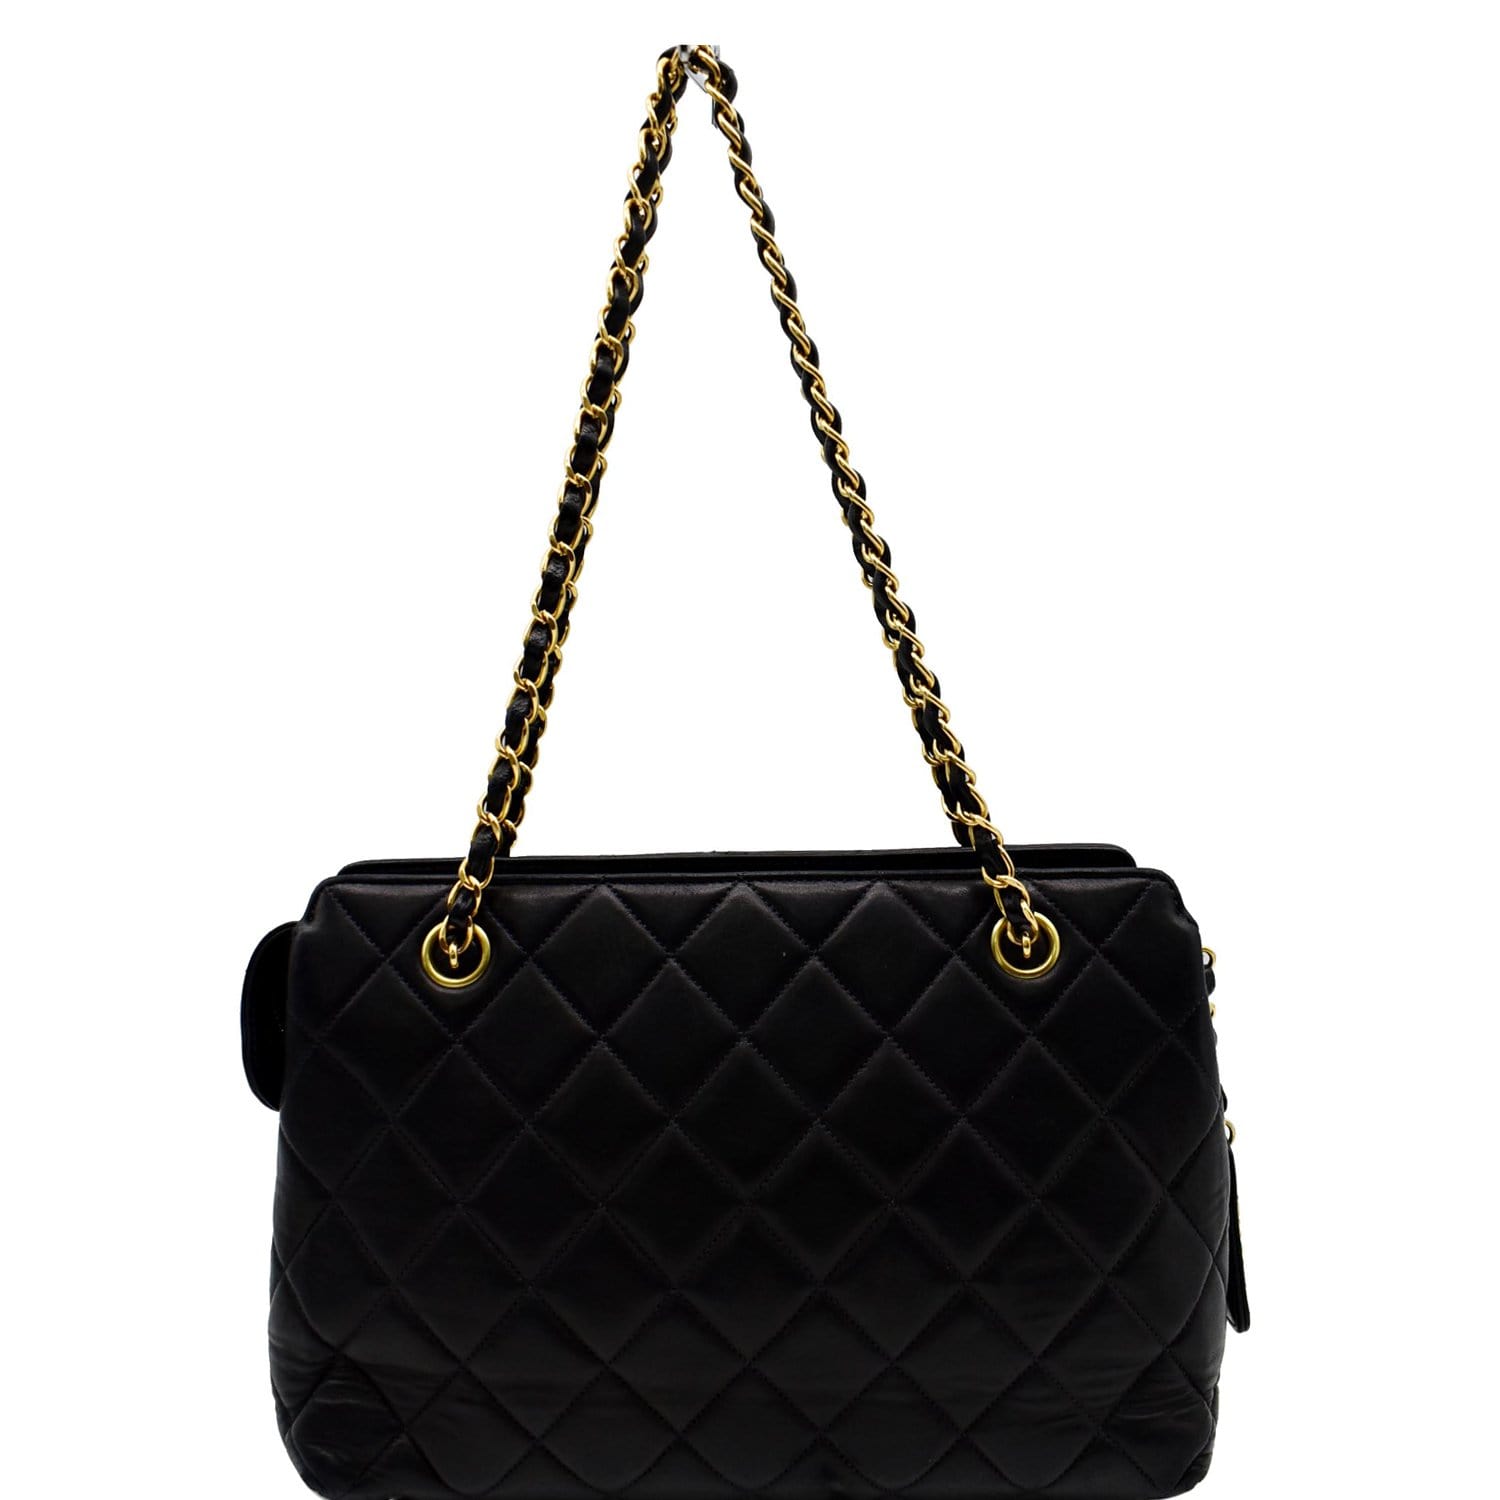 Lot - Vintage Chanel Black Quilted Bag w/ Chain Strap Box